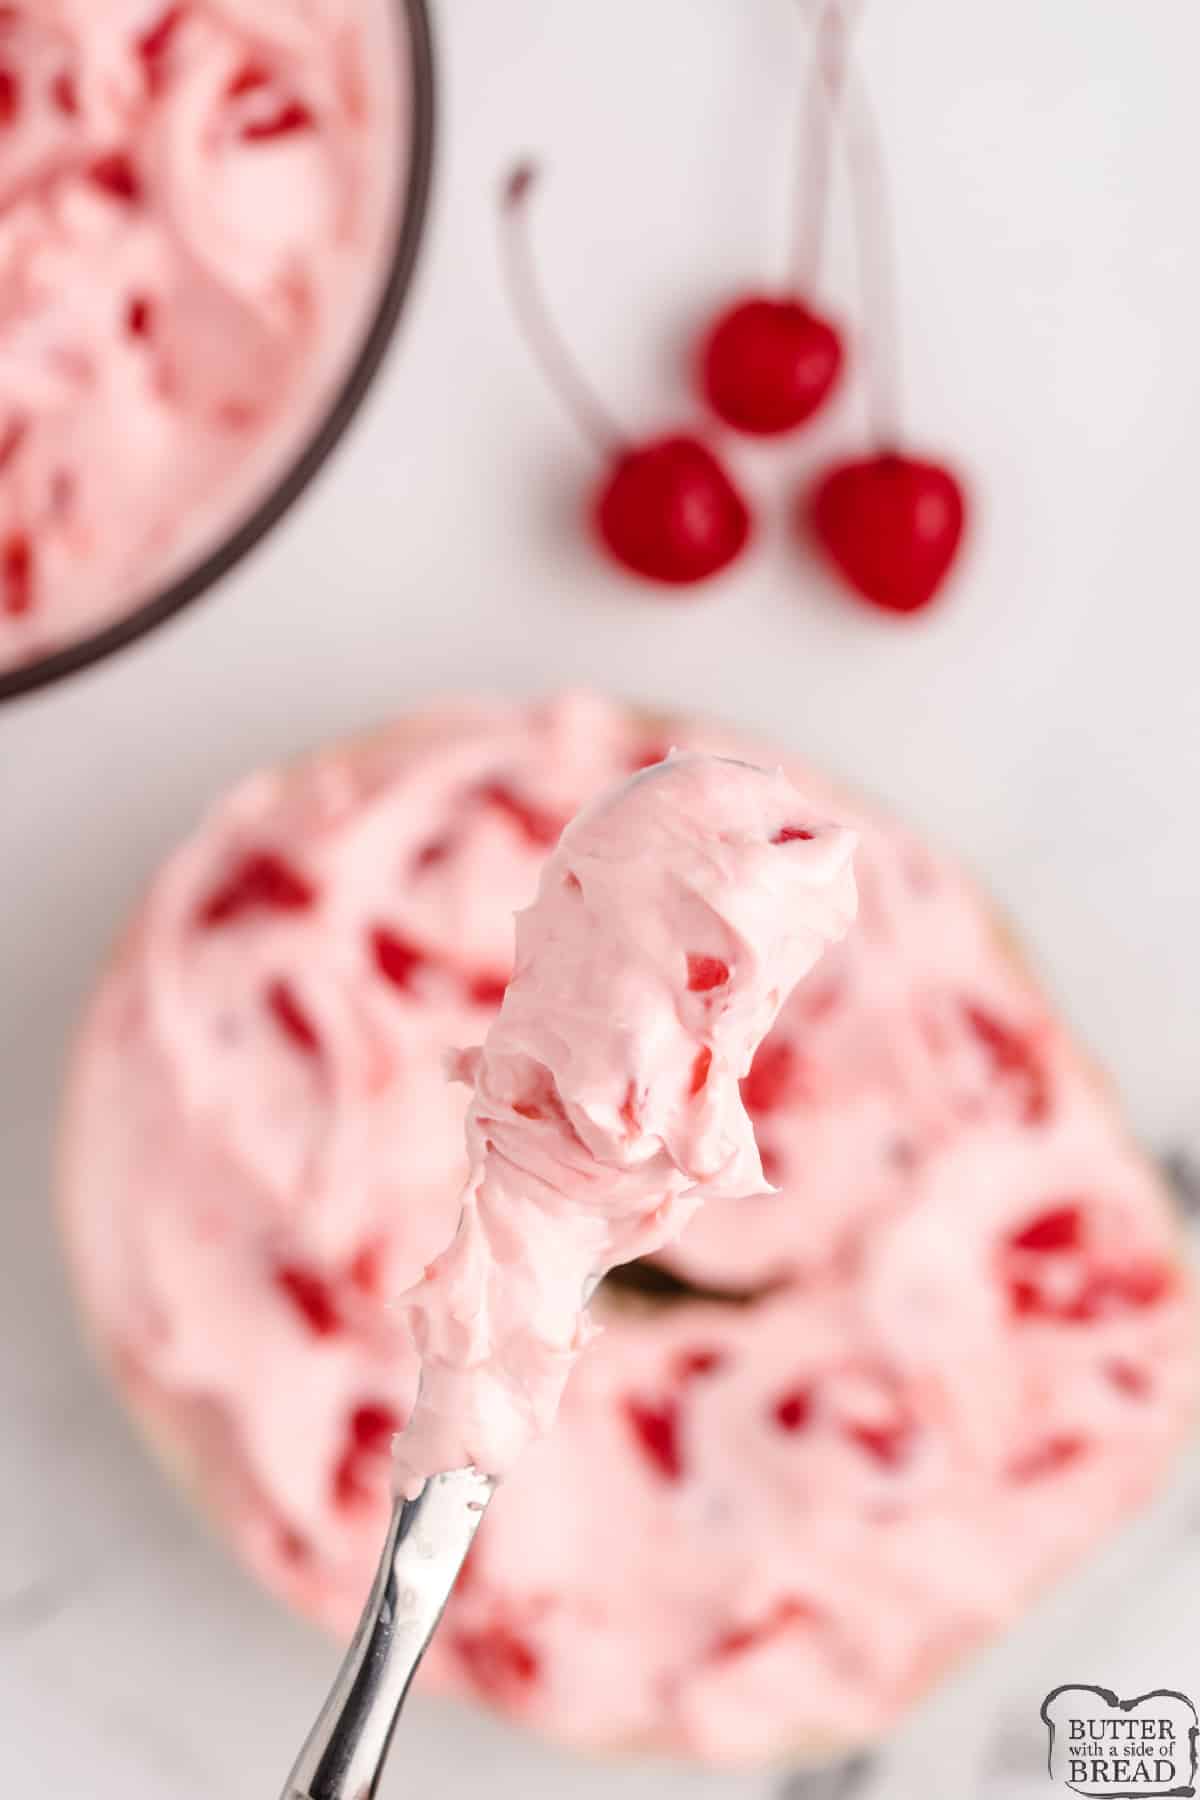 Knife with cherry spread made with cream cheese